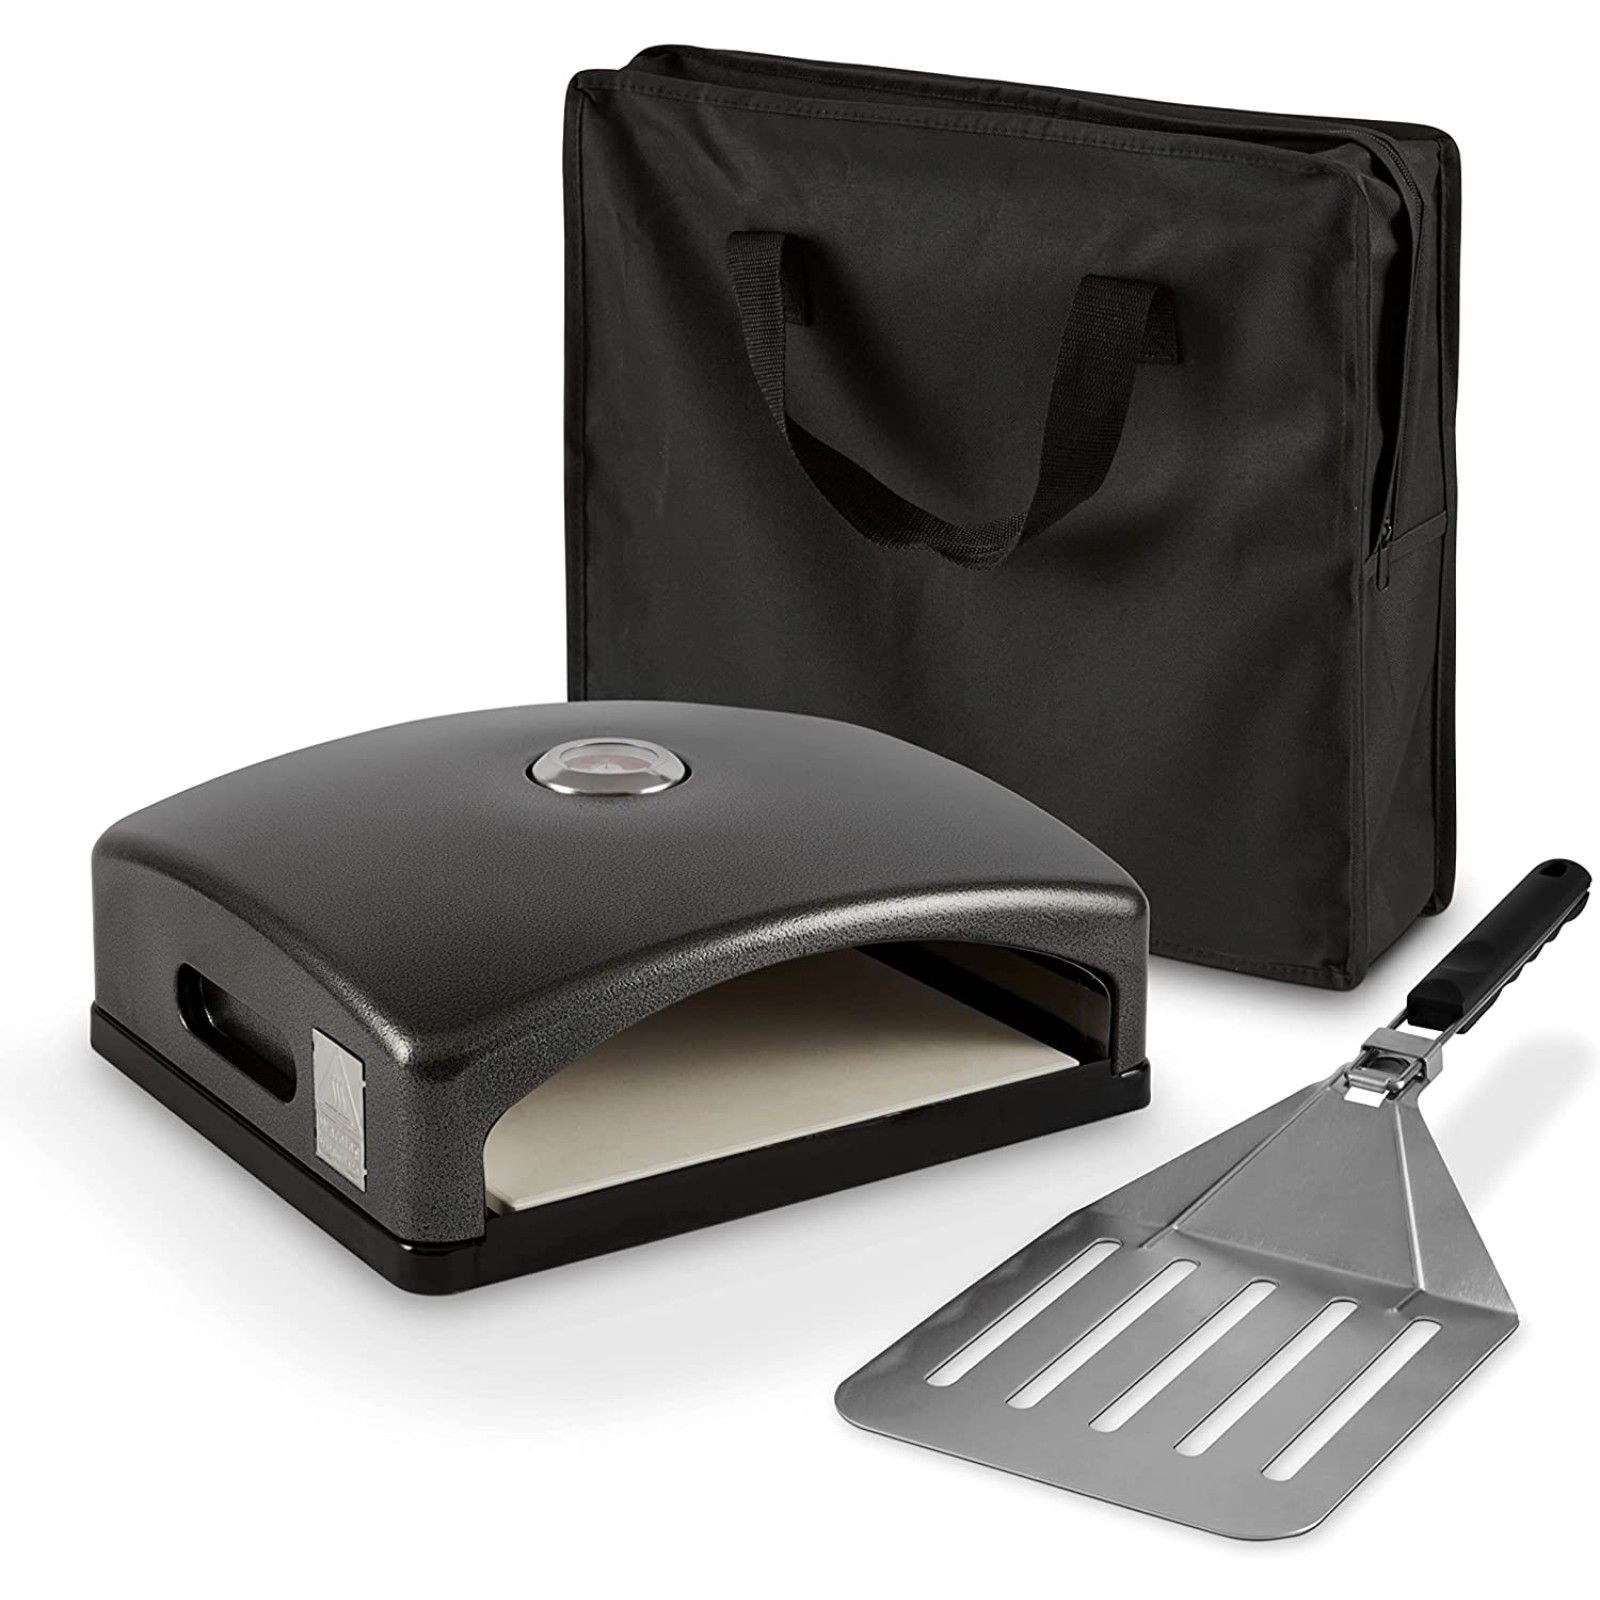 Tower T978517 Pizzazz Pizza Oven with Paddle and Carry Bag